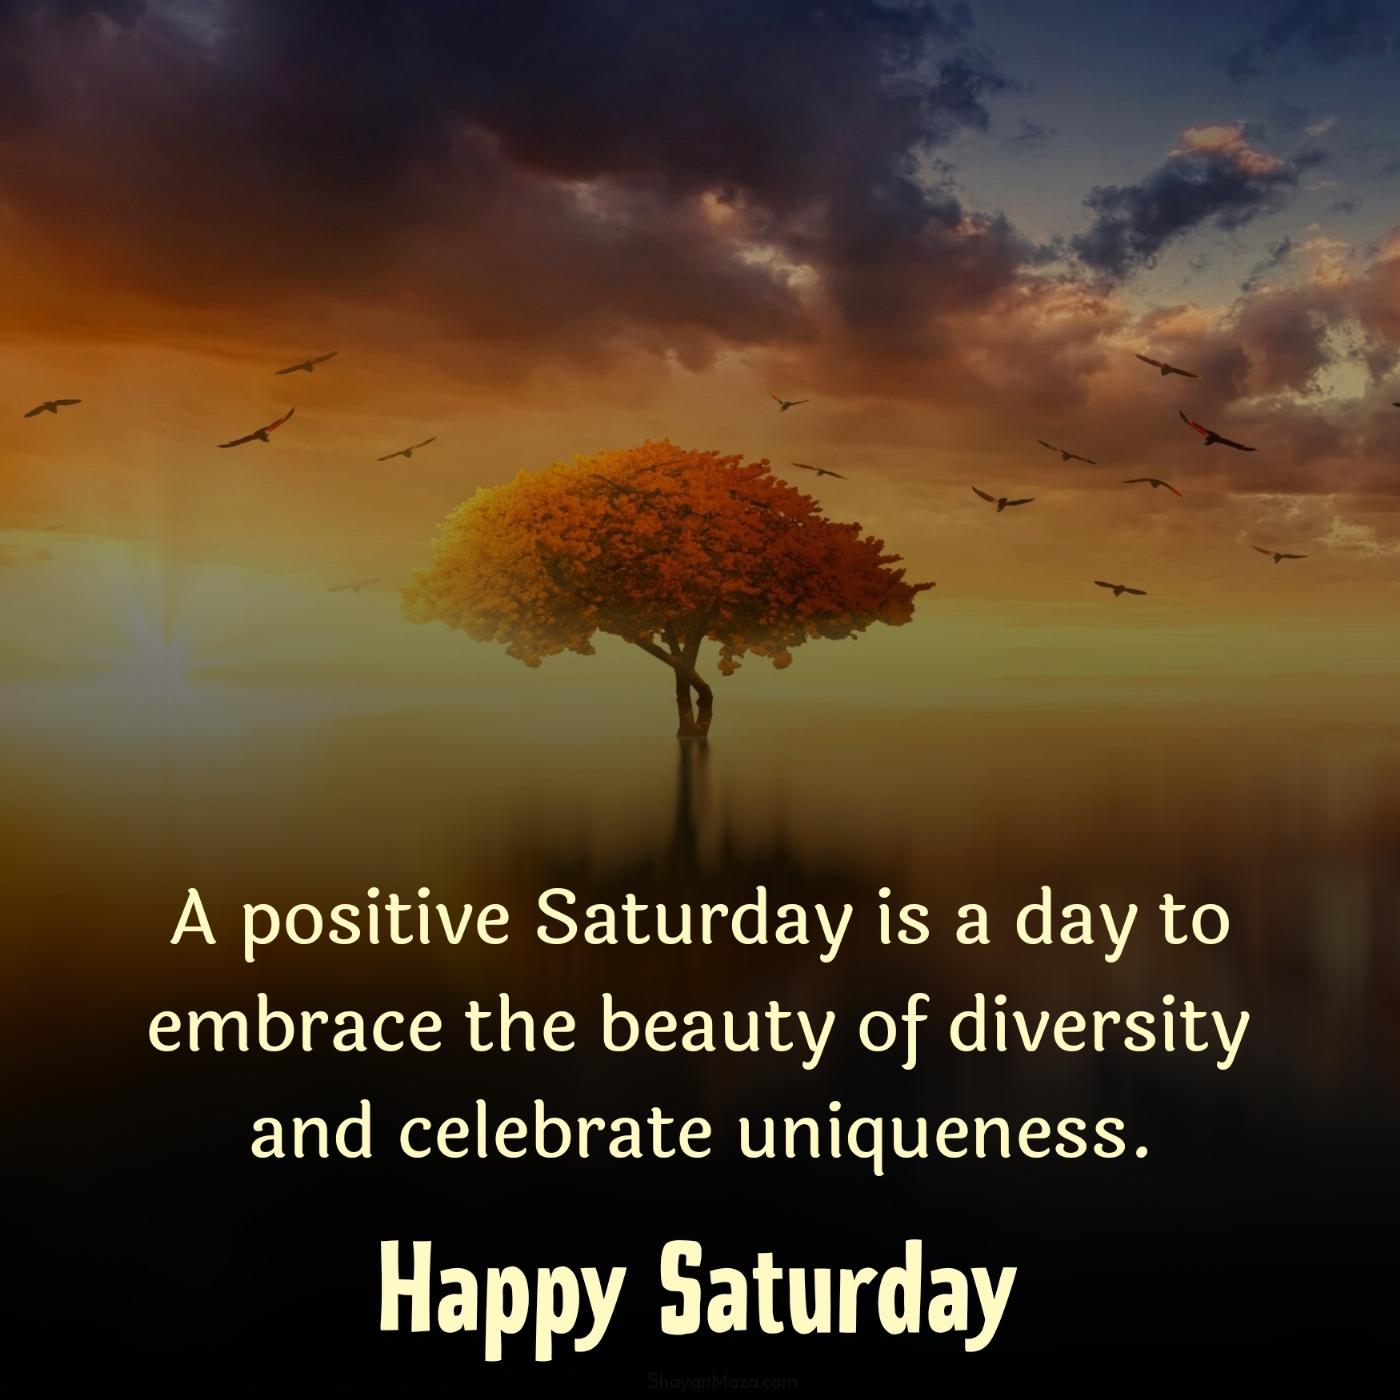 A positive Saturday is a day to embrace the beauty of diversity